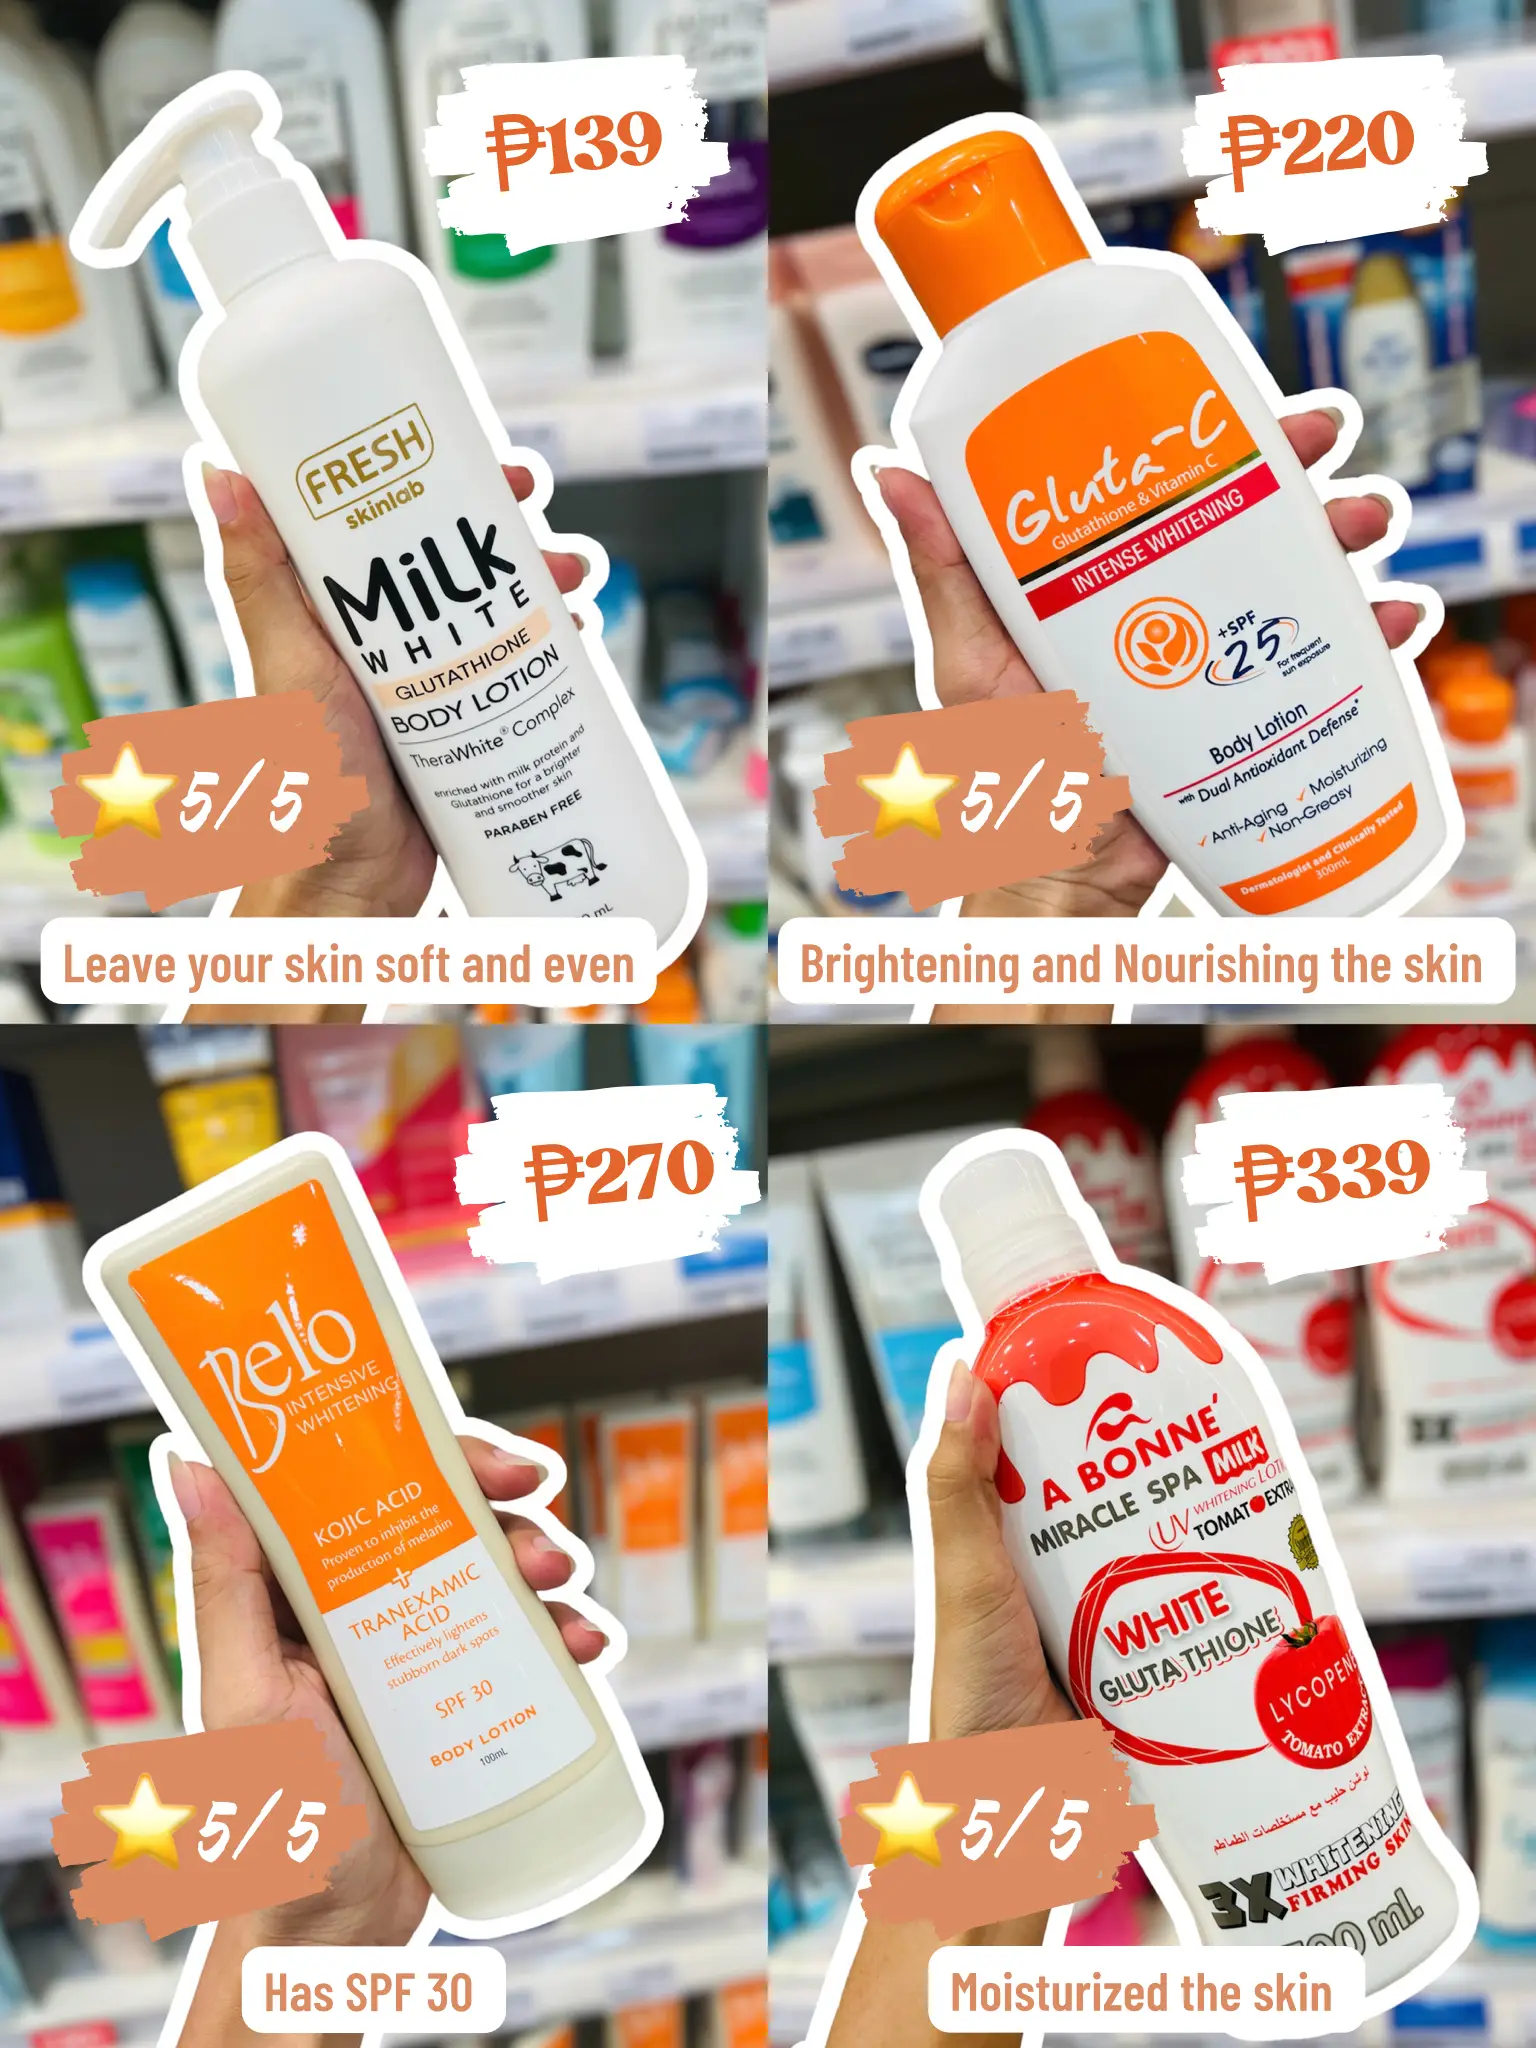 Watsons Very High Protection Sunscreen Whitening Face & Body